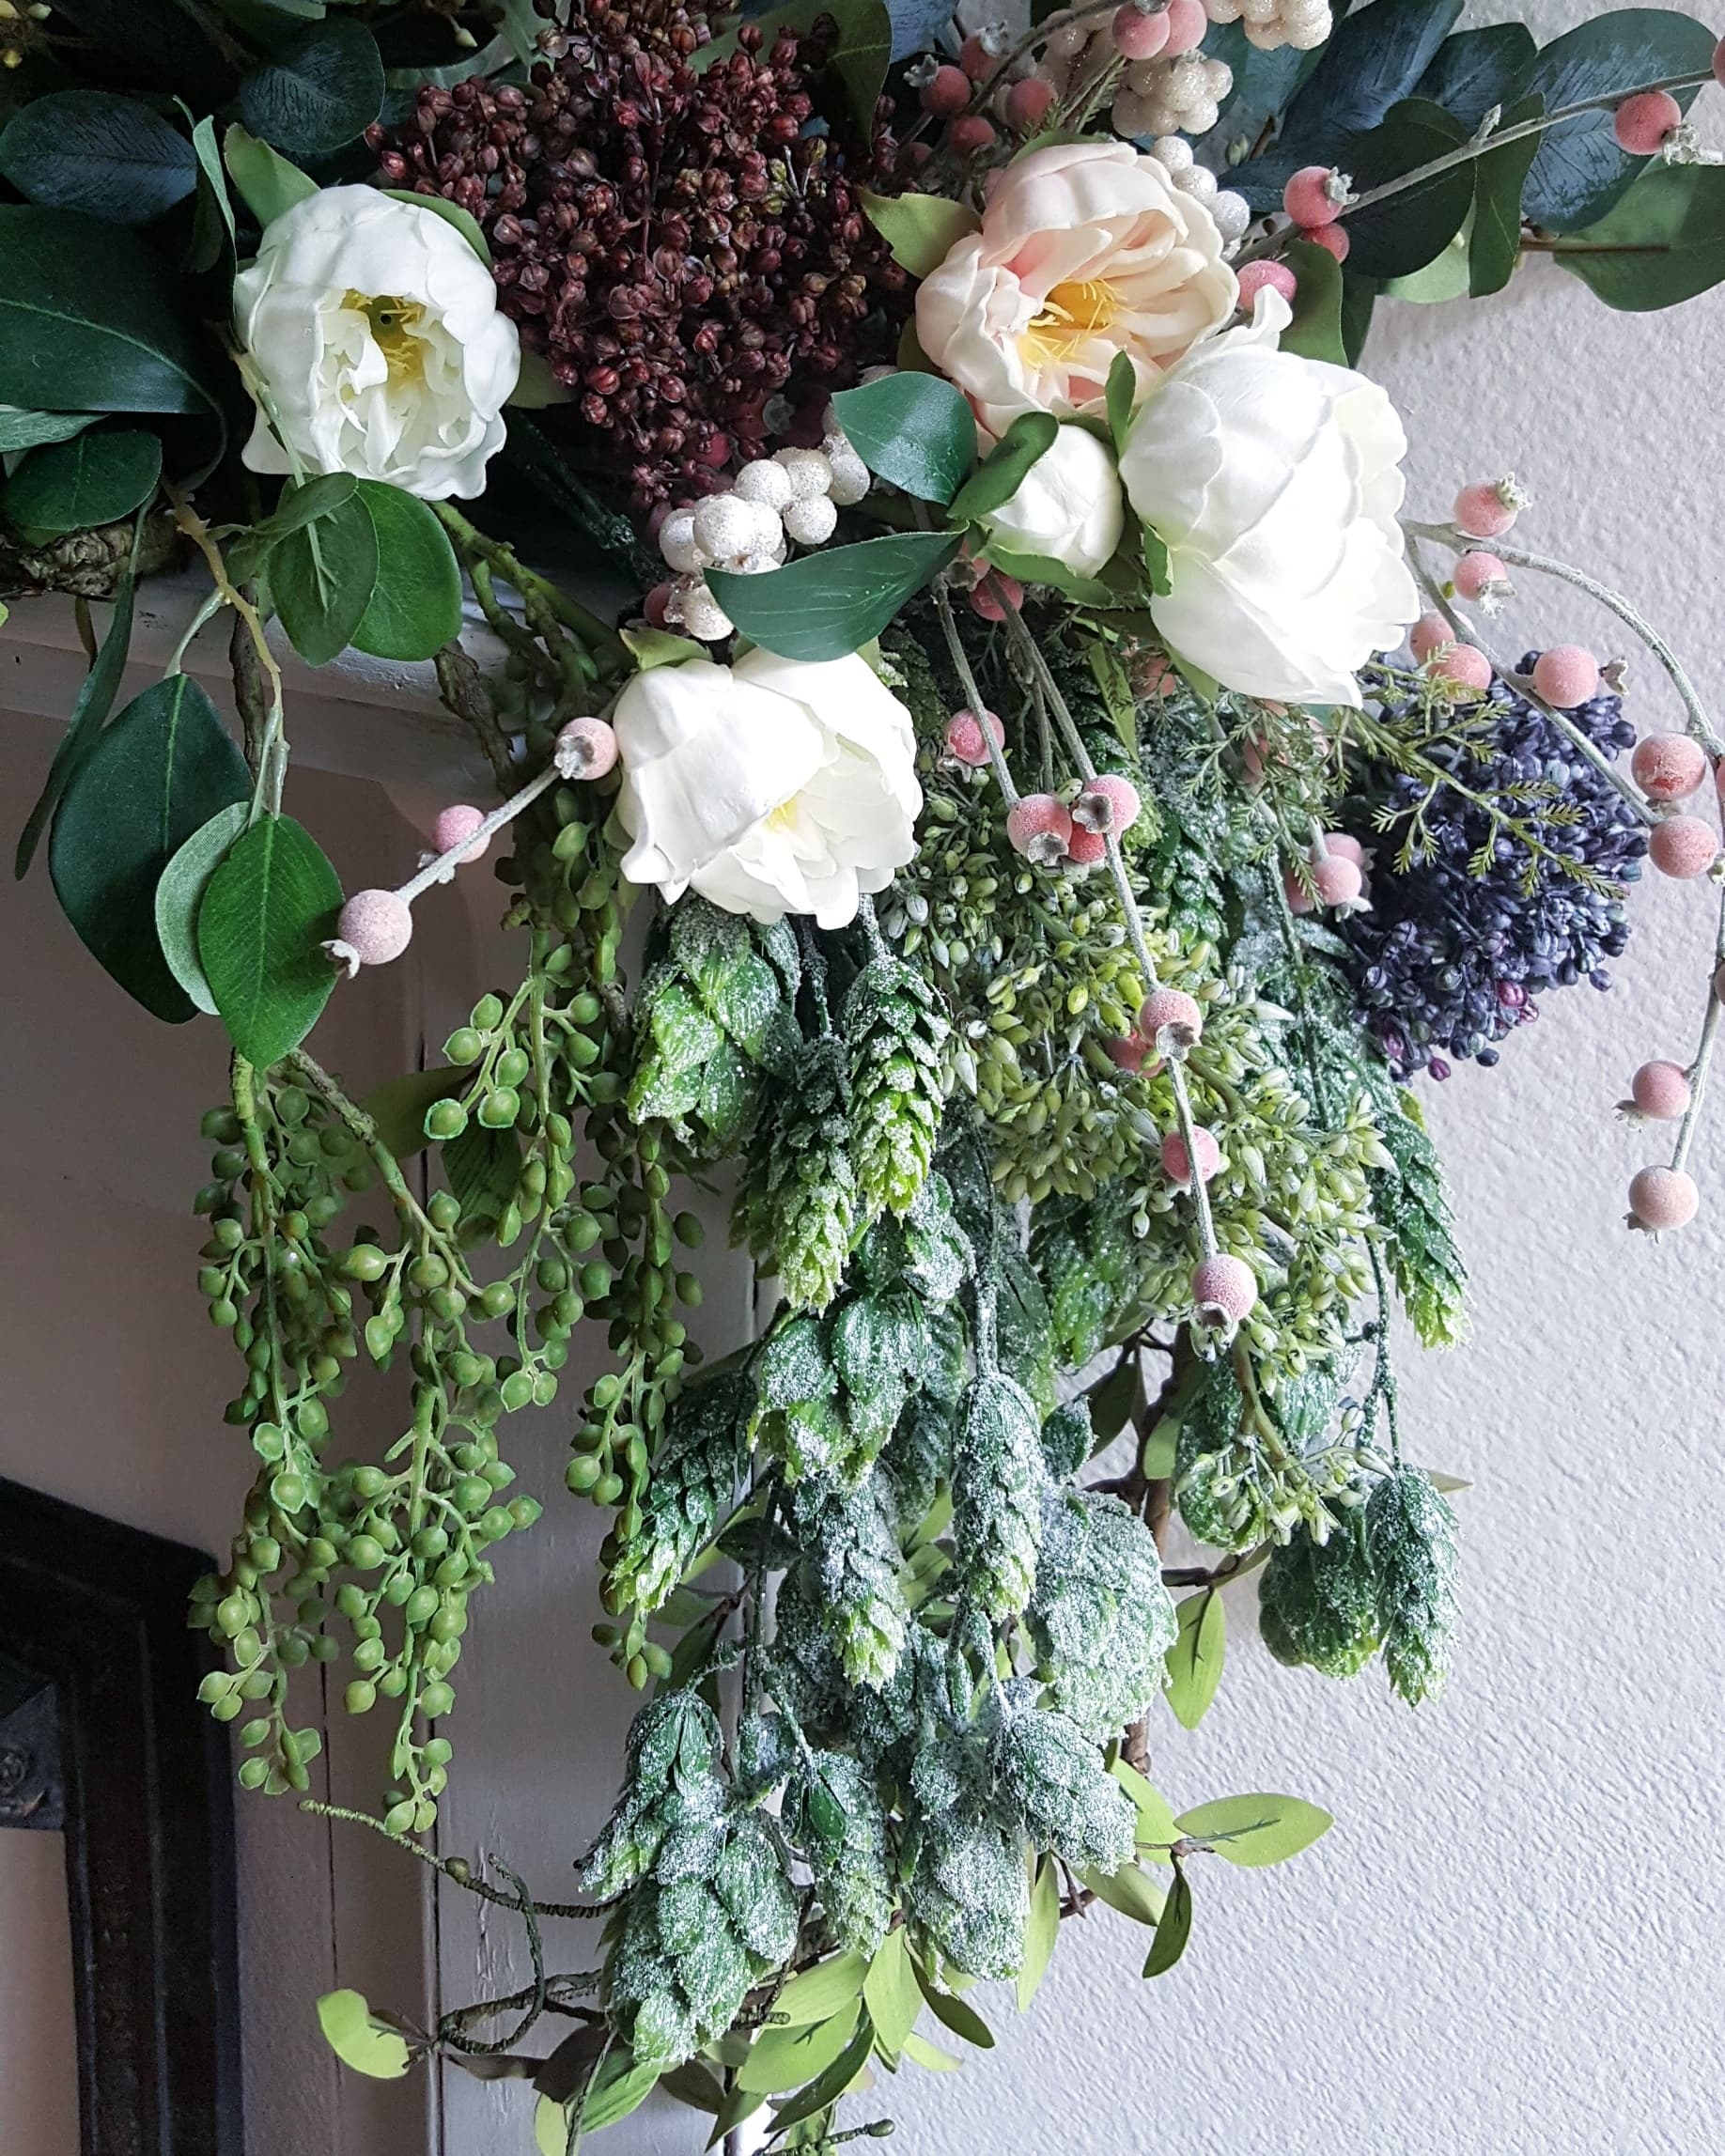 Decorate Mantel Fall Winter Faux Flowers White Neutral Design Candles Vintage Fireplace Decorate Ideas Wood Mirror Succulents Peonies Berry Branches Eucalyptus Afloral Antique Decor Inspiration